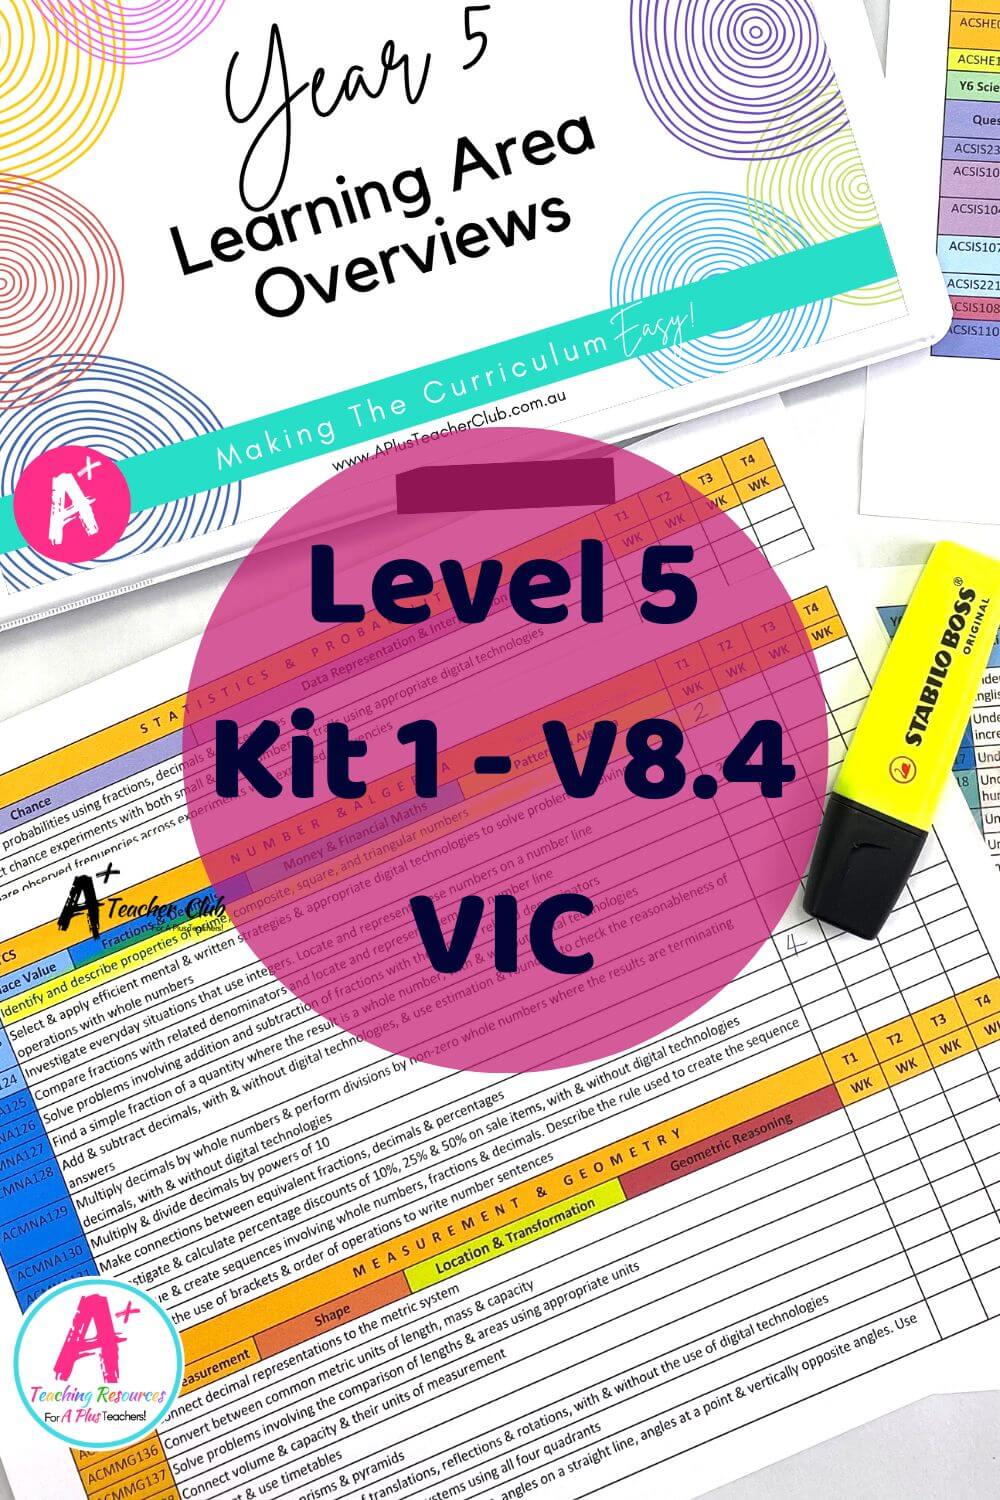 Level 5 Forward Planning Curriculum Overview VIC 8.4